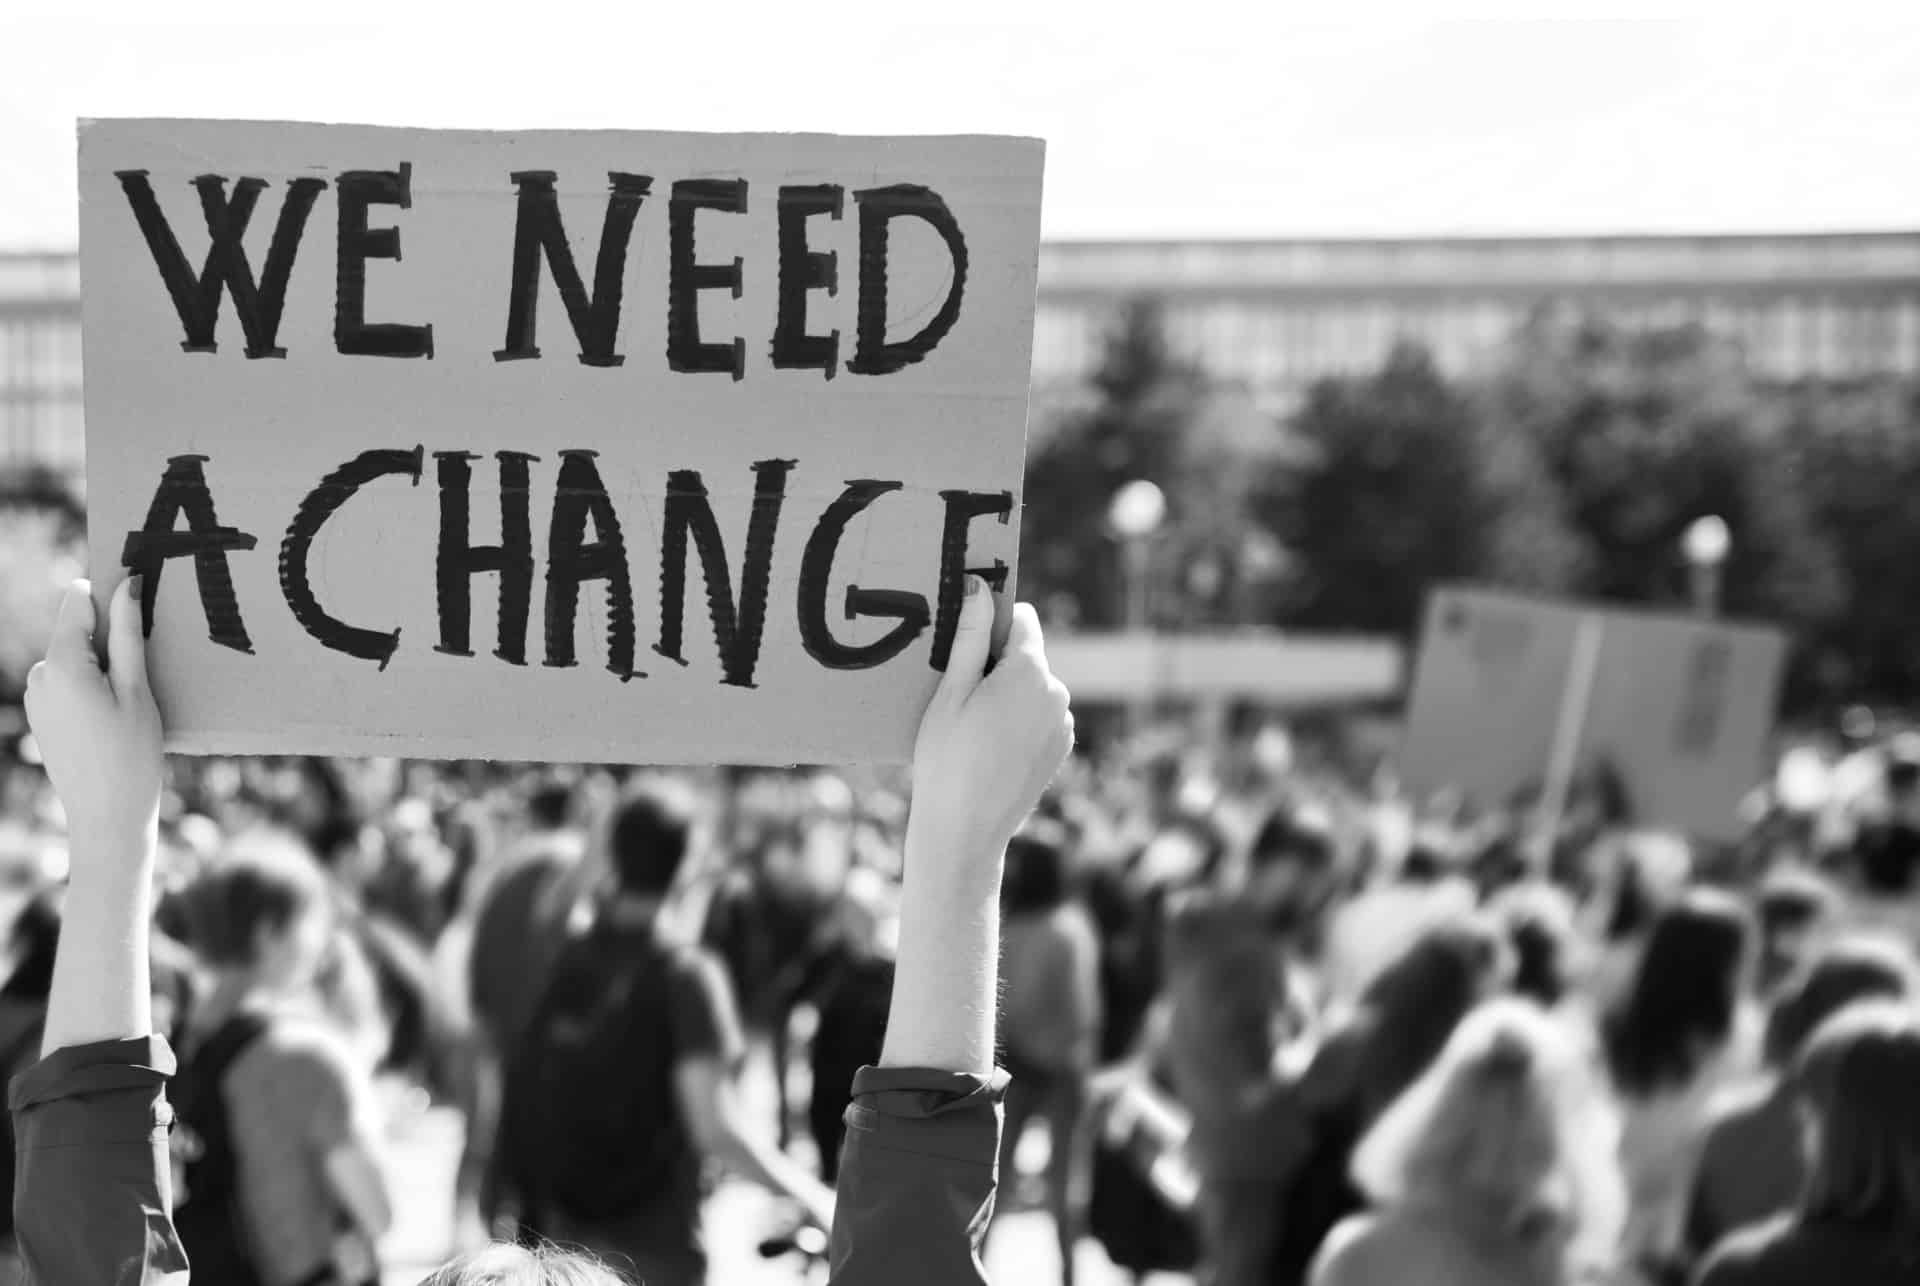 A person holding up a sign that says we need a change.